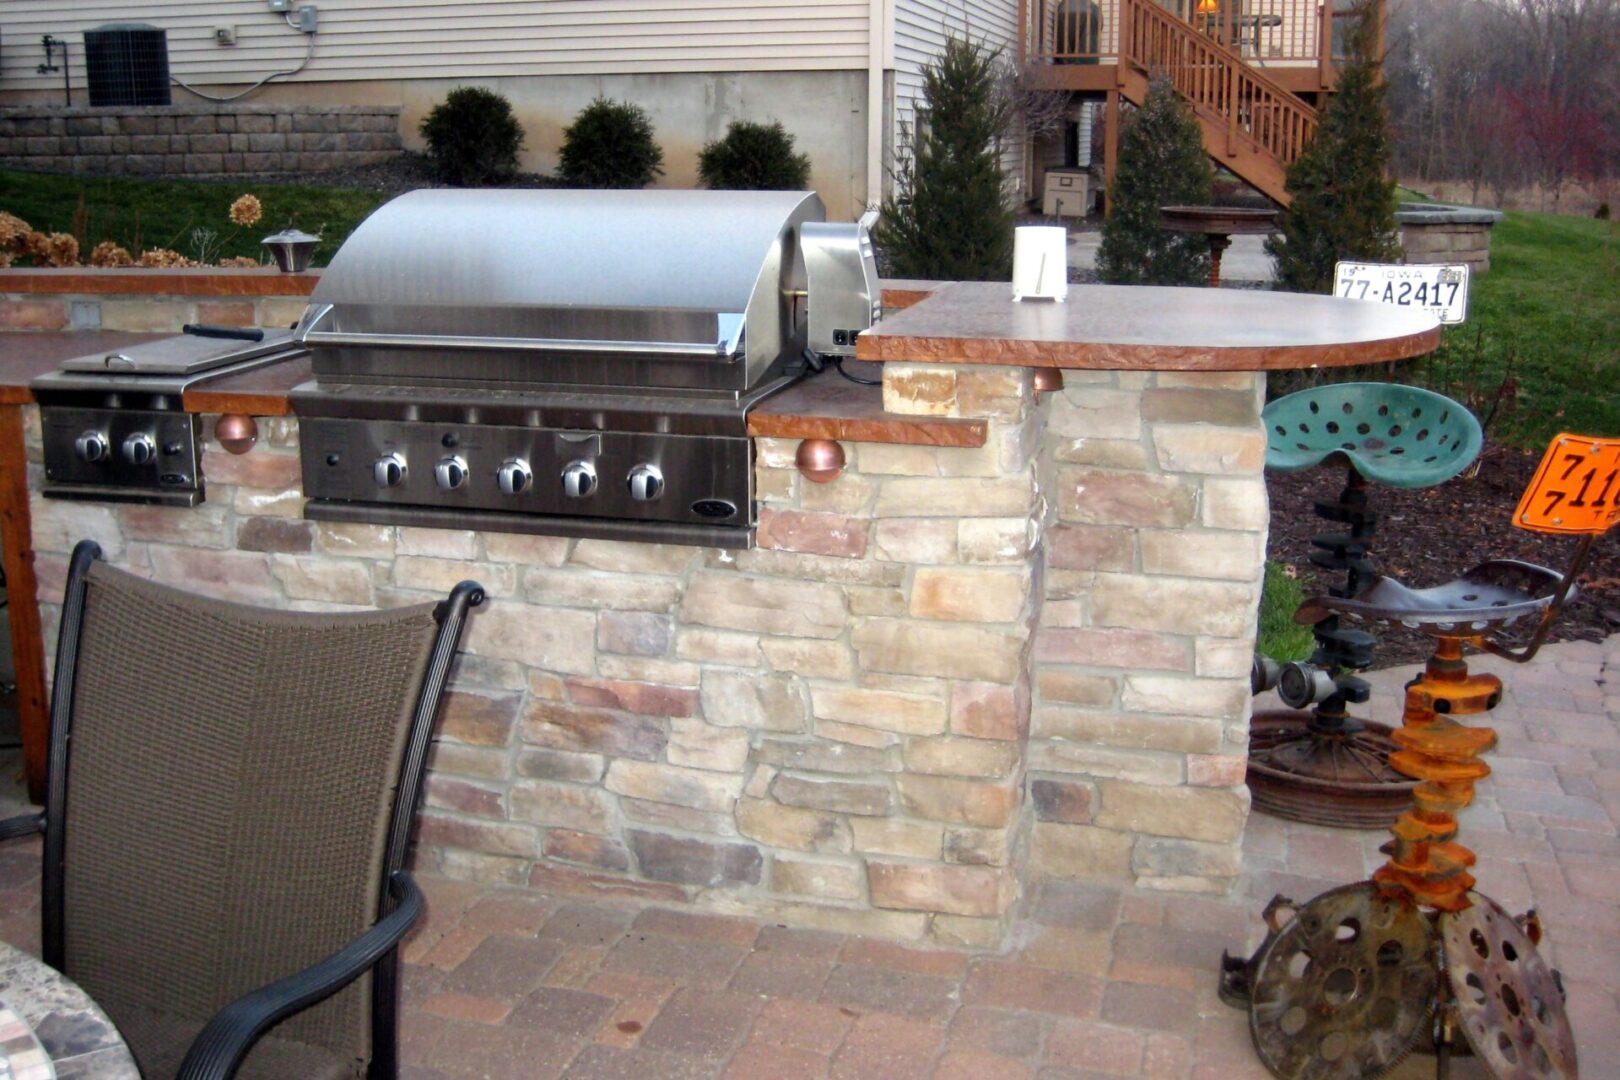 Outdoor grill on top of a brick counter with brown marble countertops